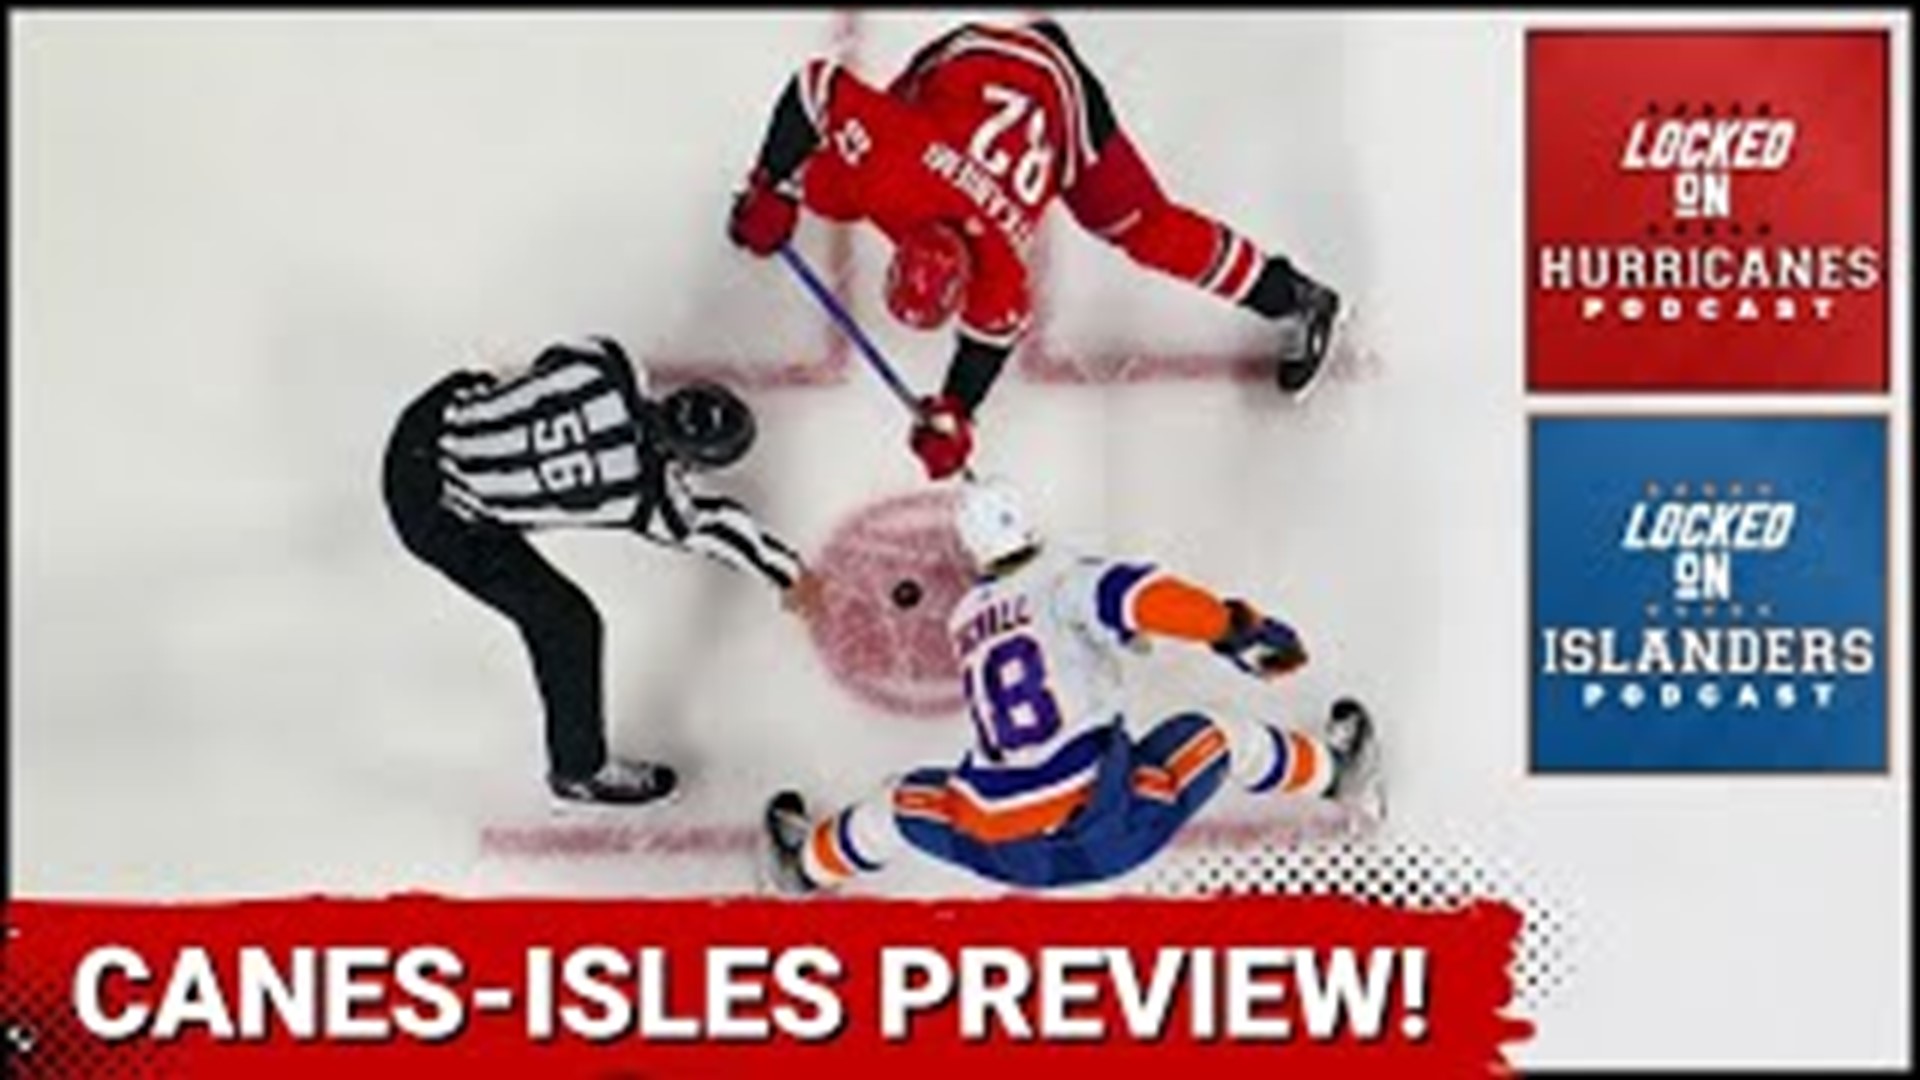 Covering the biggest storylines going into the series as the Canes and Isles meet again in the first round.  That and more on Locked On Hurricanes.